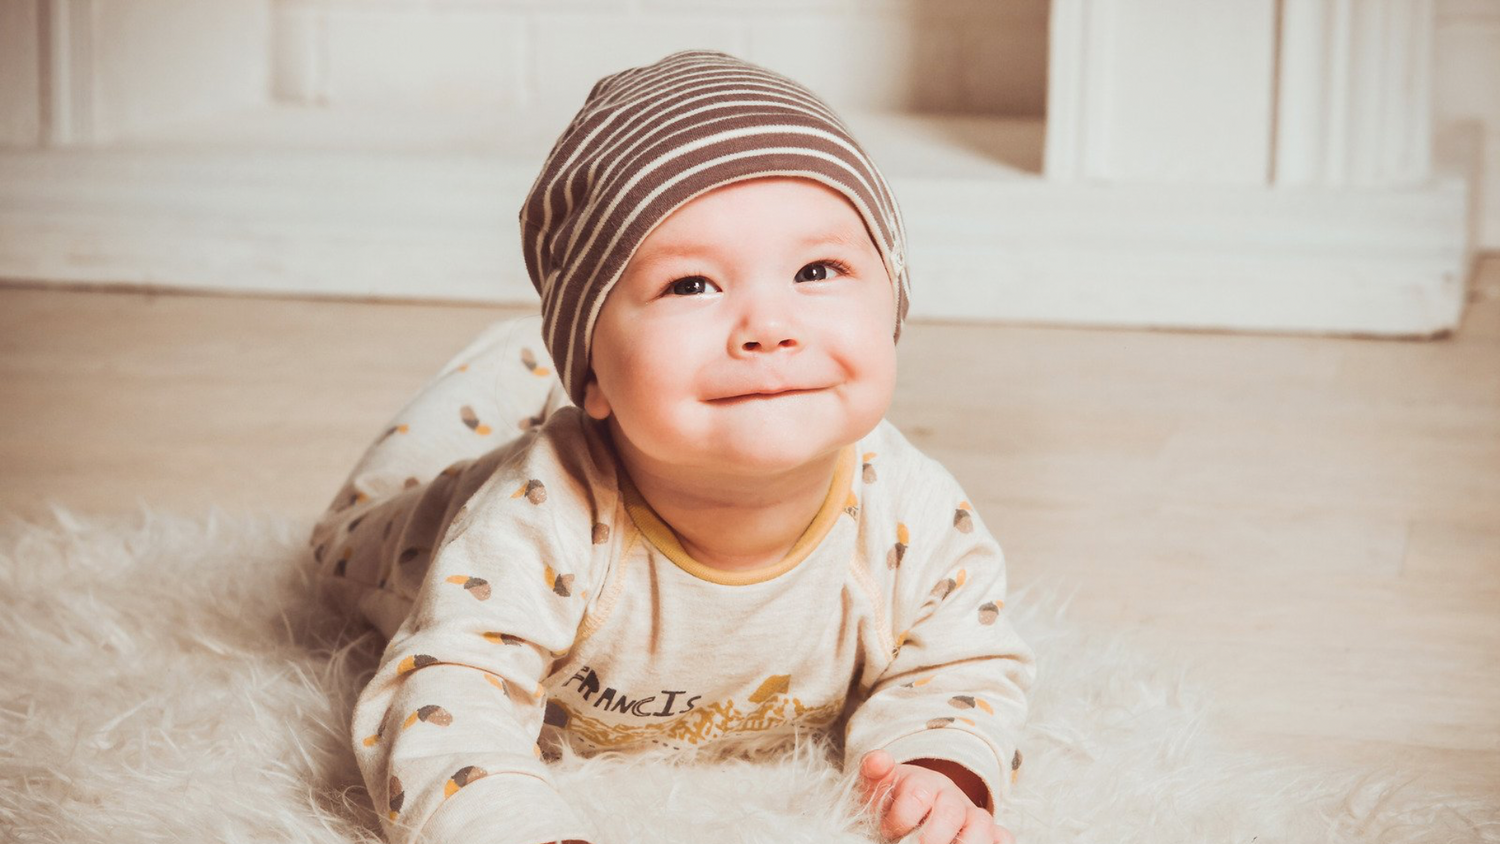 Capture baby smiling milestones in our memory books